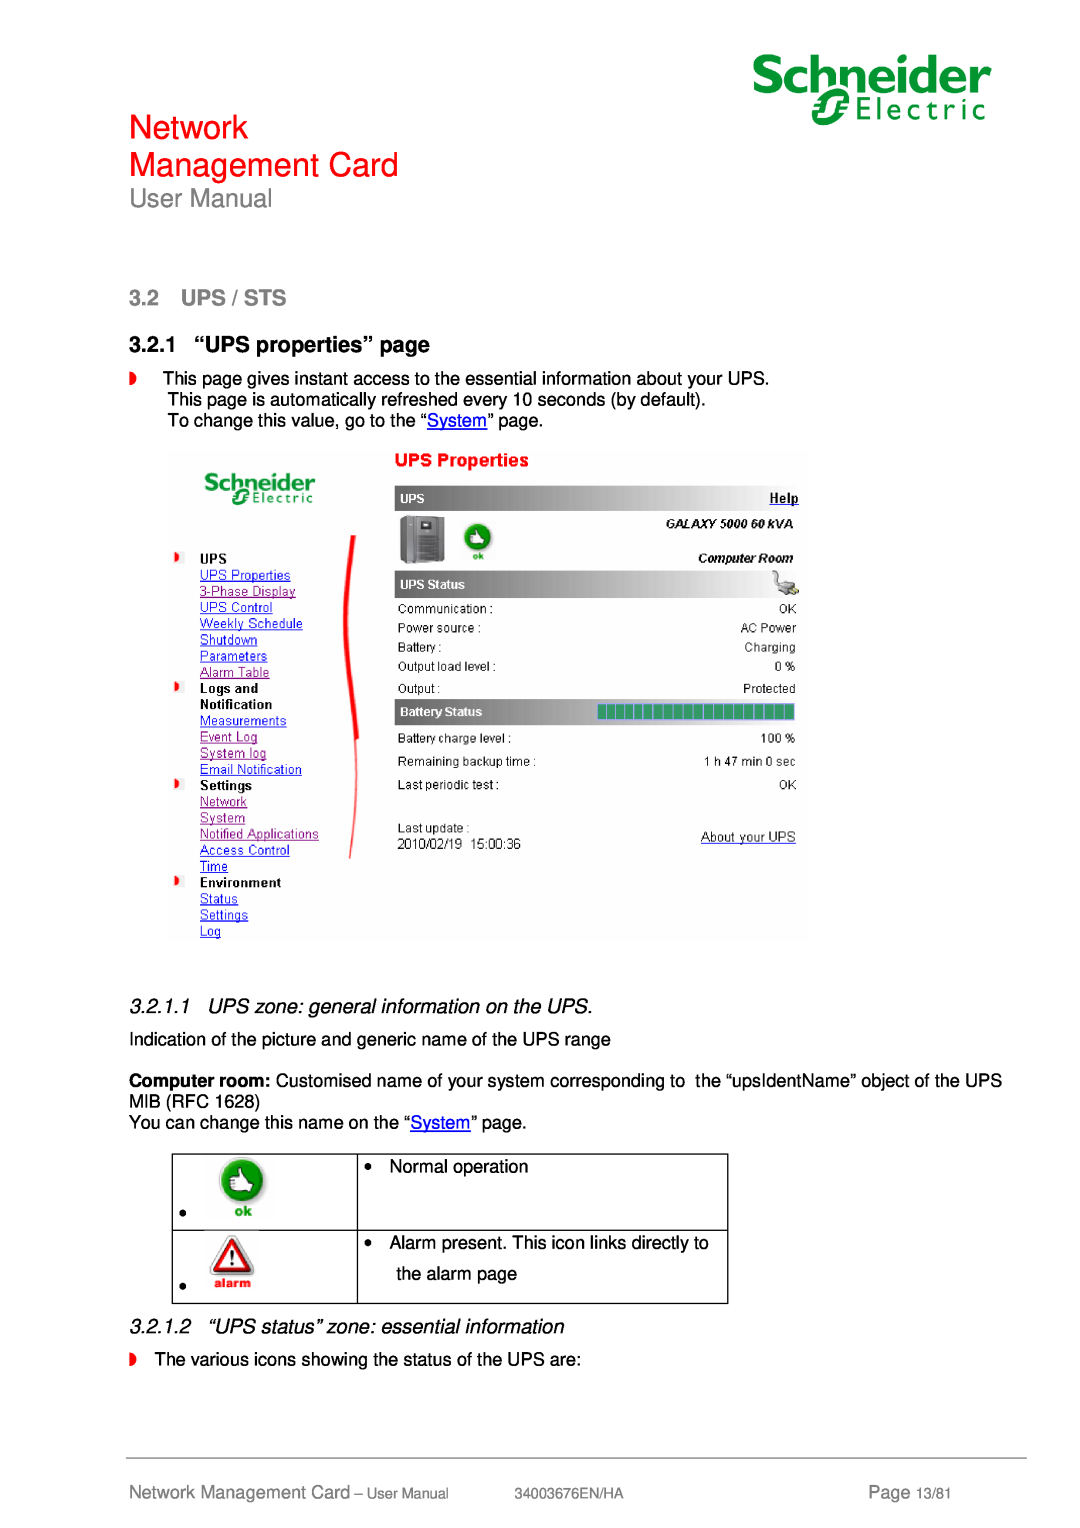 Schneider Electric 66074, 66846 Ups / Sts, 3.2.1 “UPS properties” page, Network Management Card, User Manual, Page 13/81 